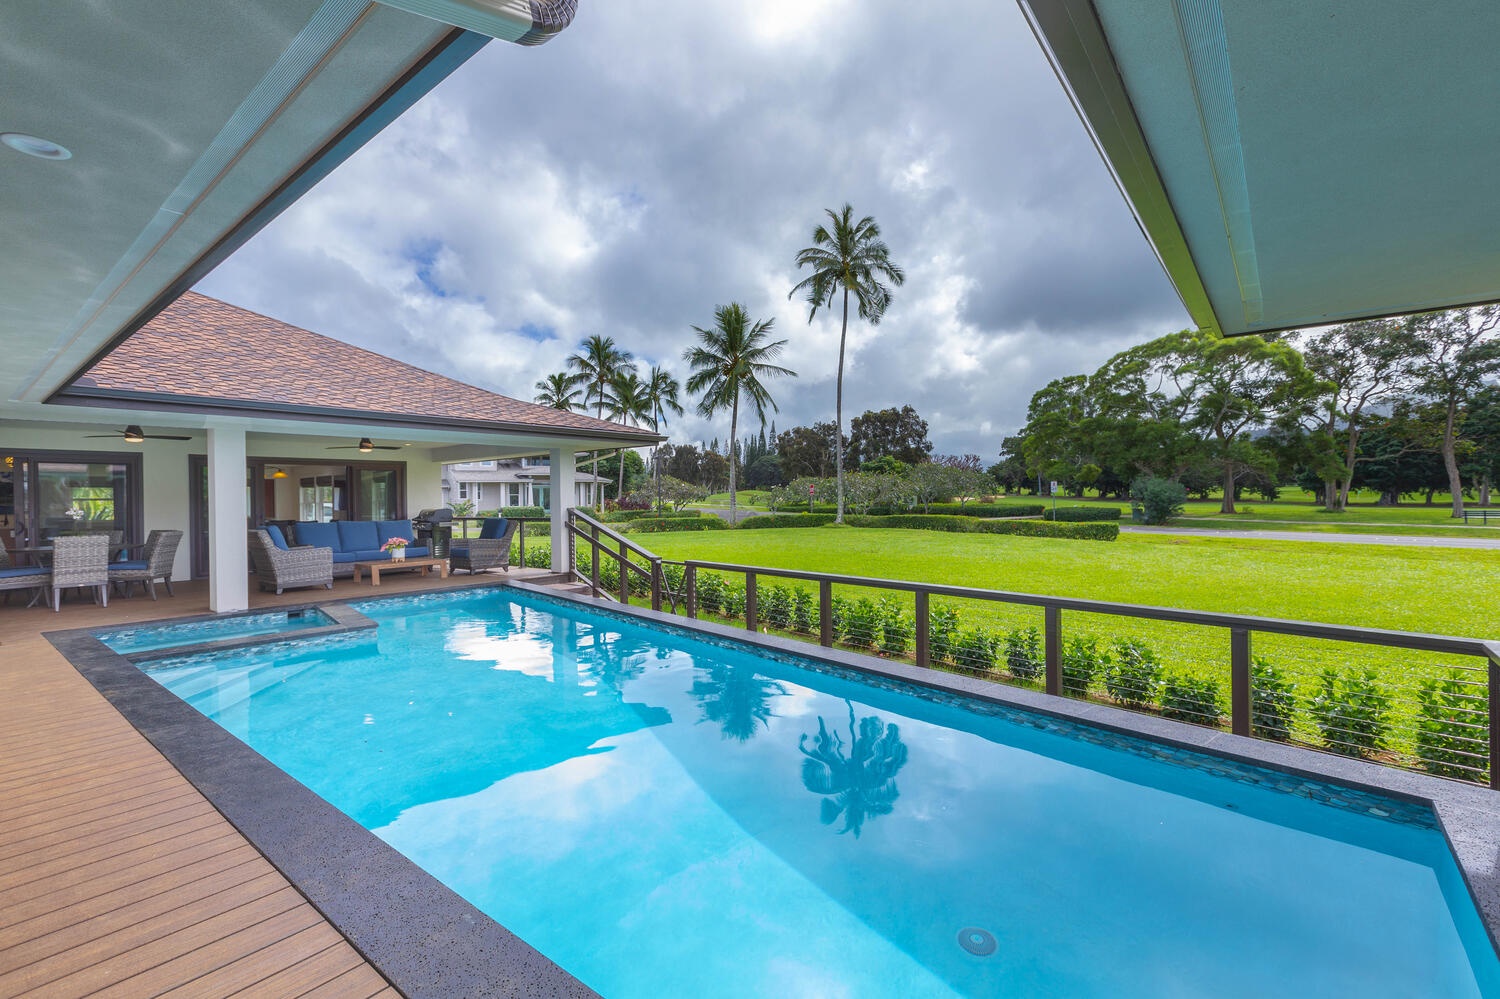 Princeville Vacation Rentals, Aloha Villa - Take a dip in the olympic style pool